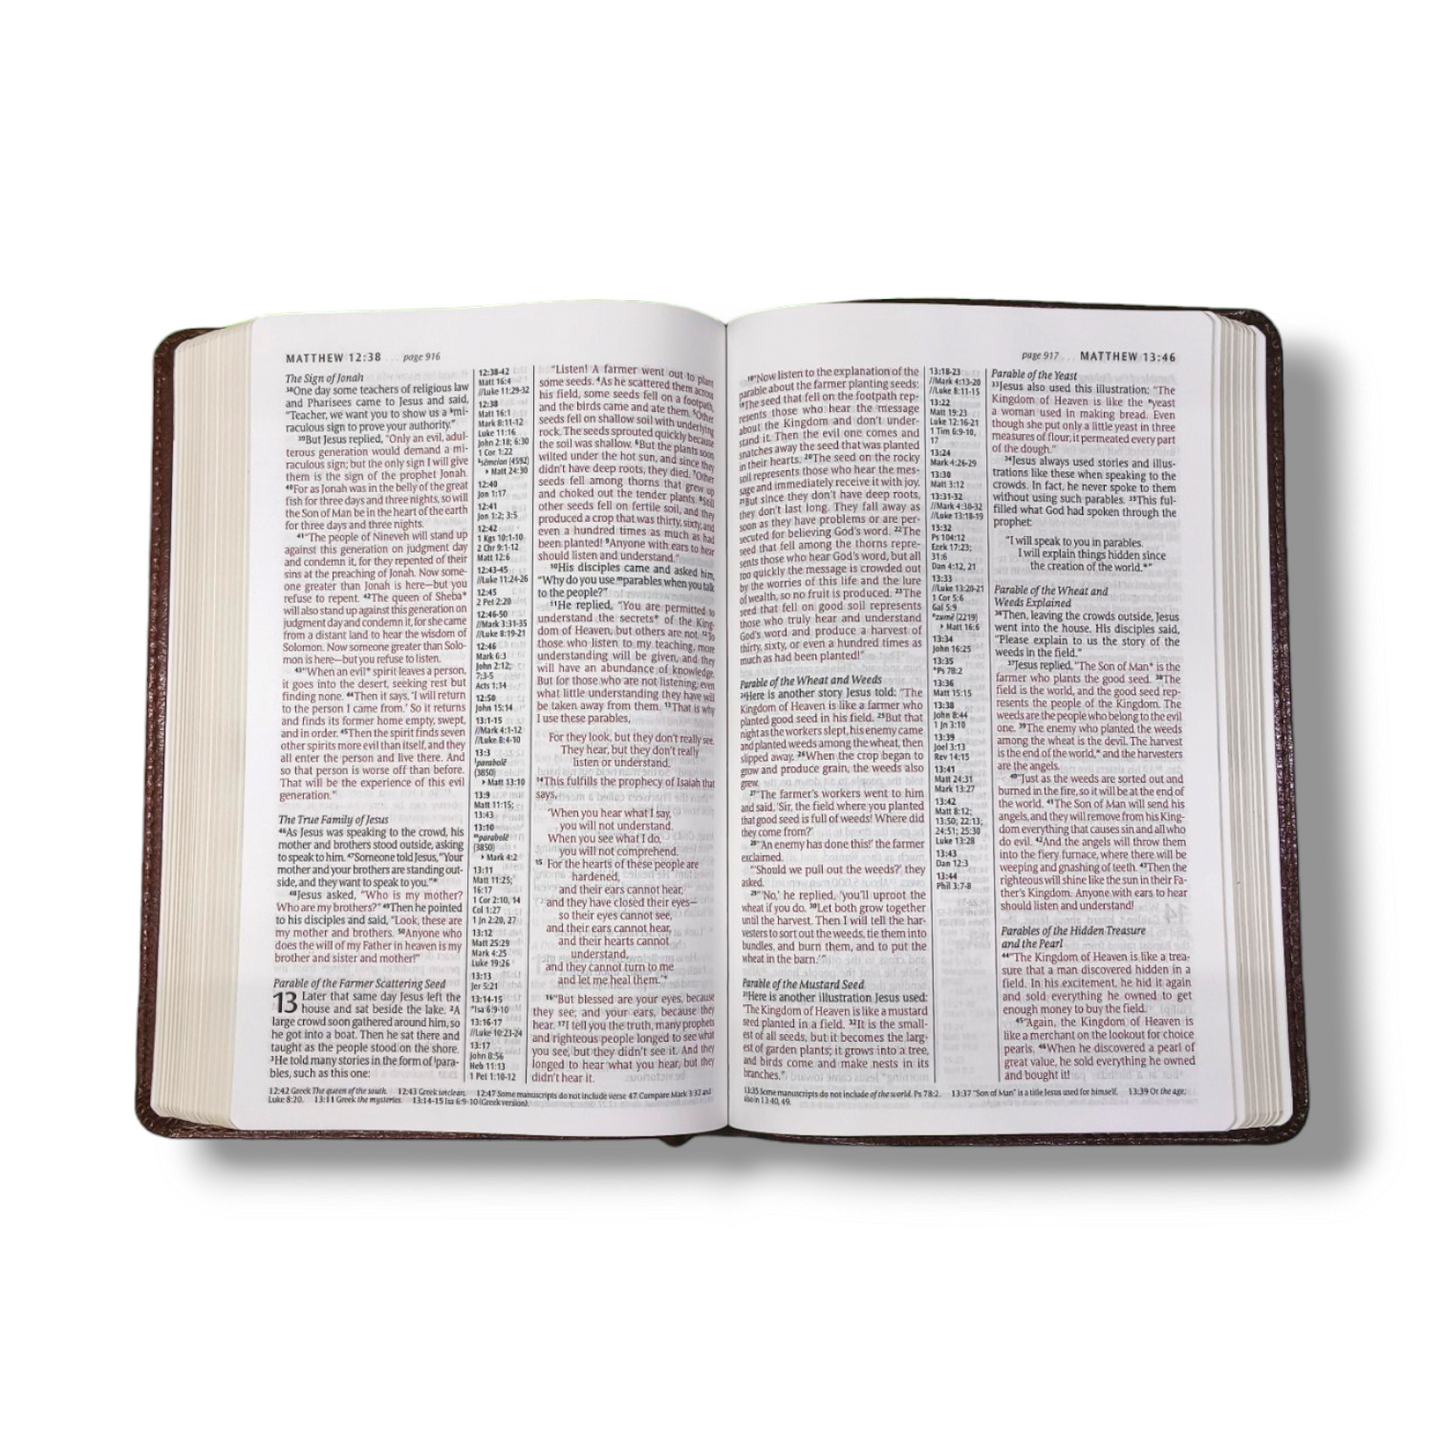 NLT Slimline Center Column | Reference Bible | Brown Leather Attractive Design Edition | Large Print | With Red Letter Edition | New Edition